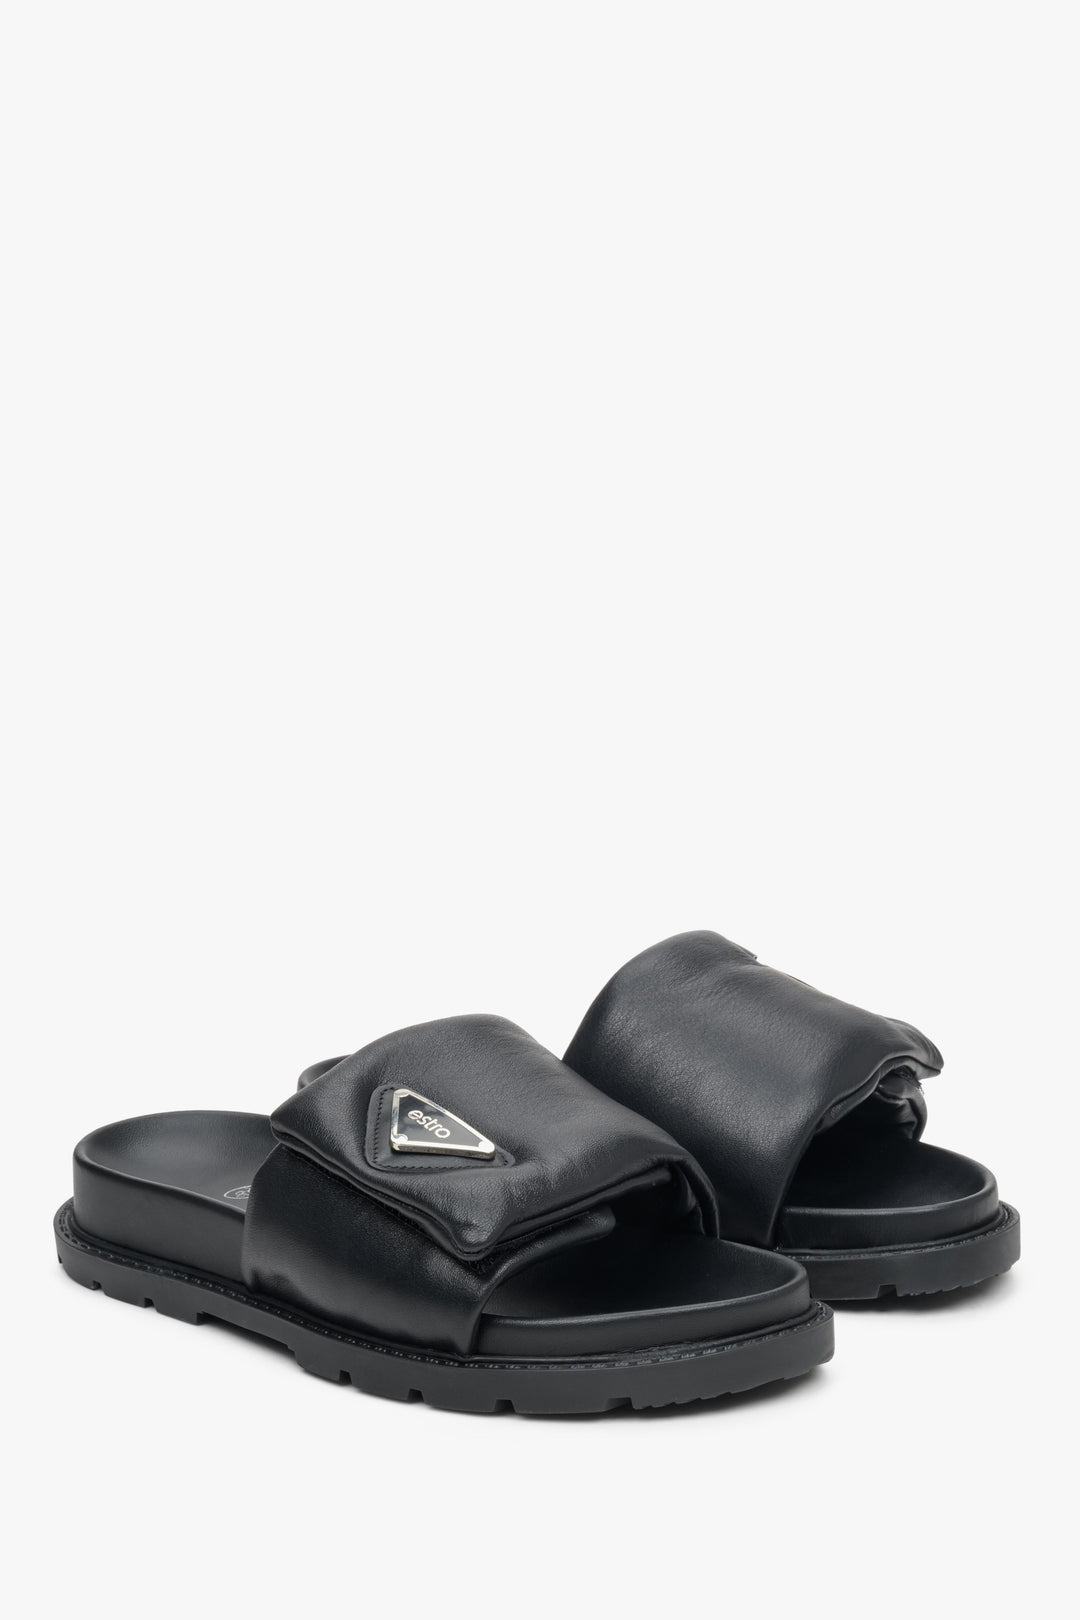 Chic, perfect for summer women's black slides on an elastic sole.